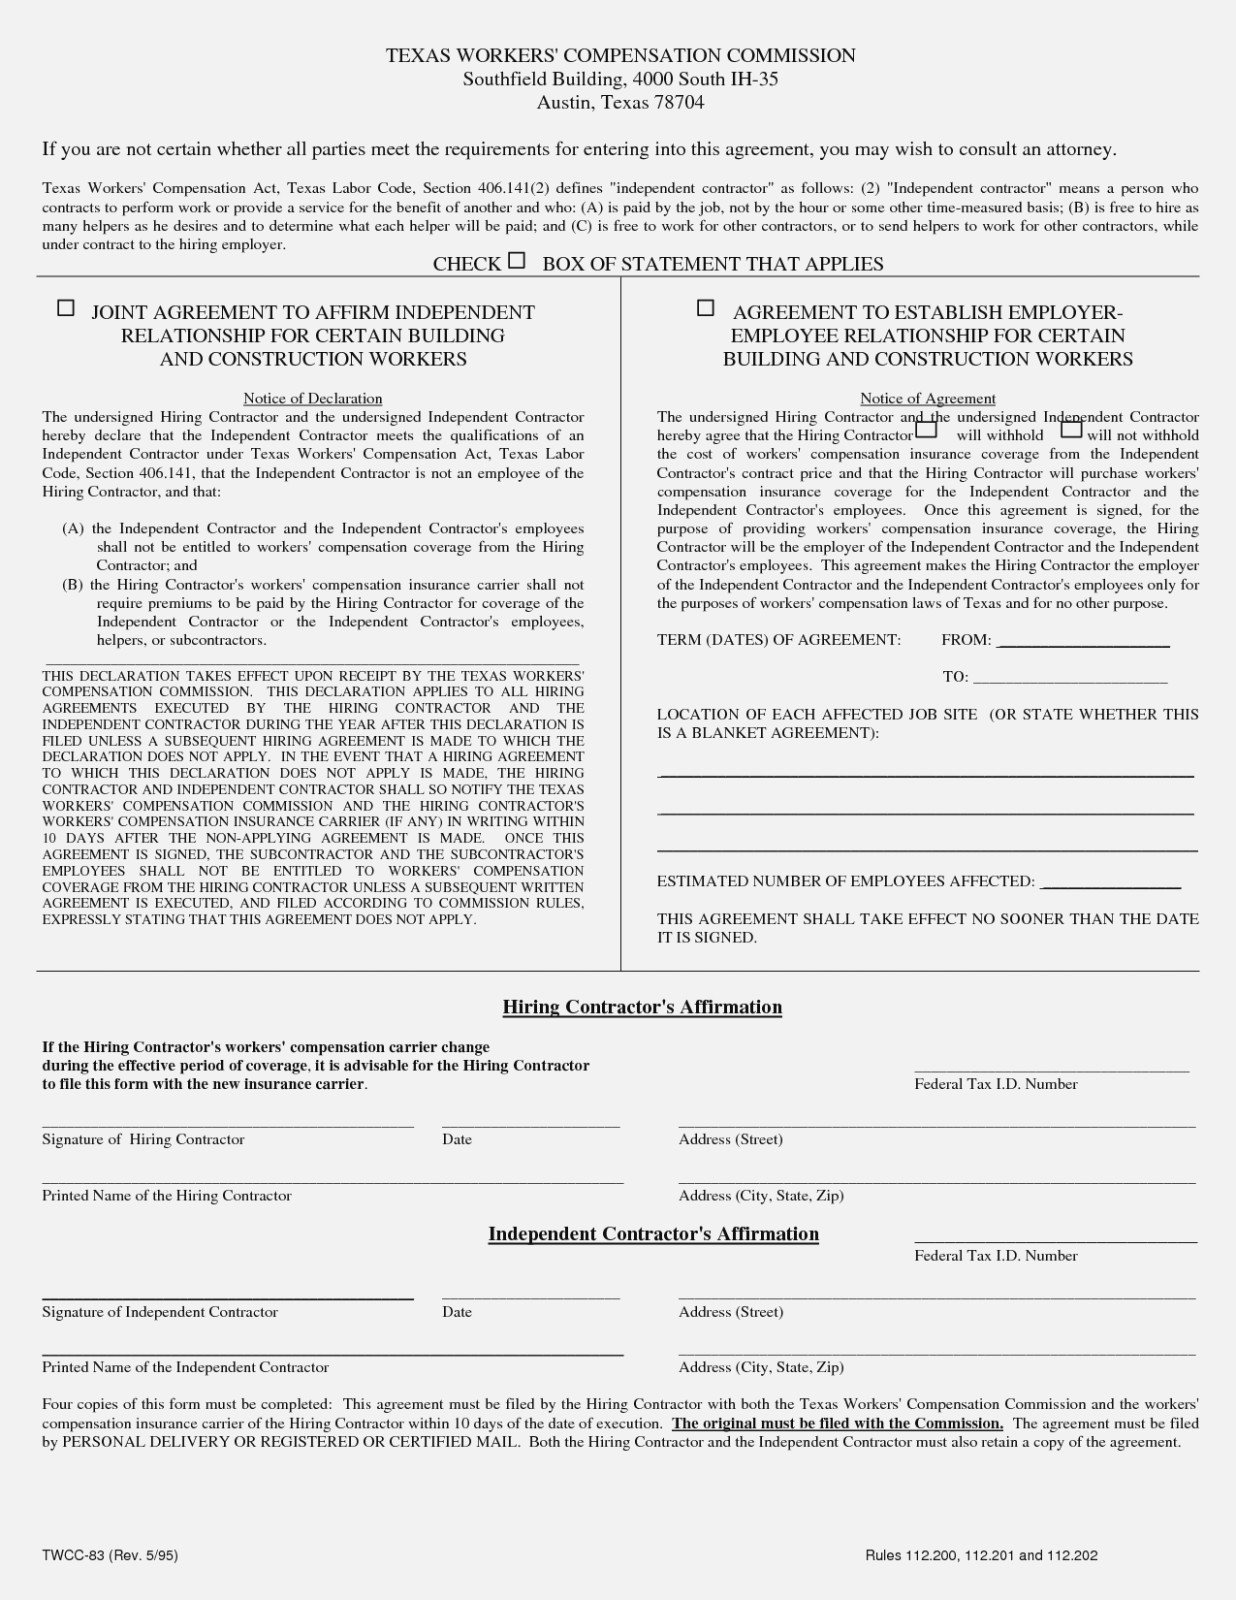 Workers Compensation Waiver form Texas Workers P Waiver form Texas